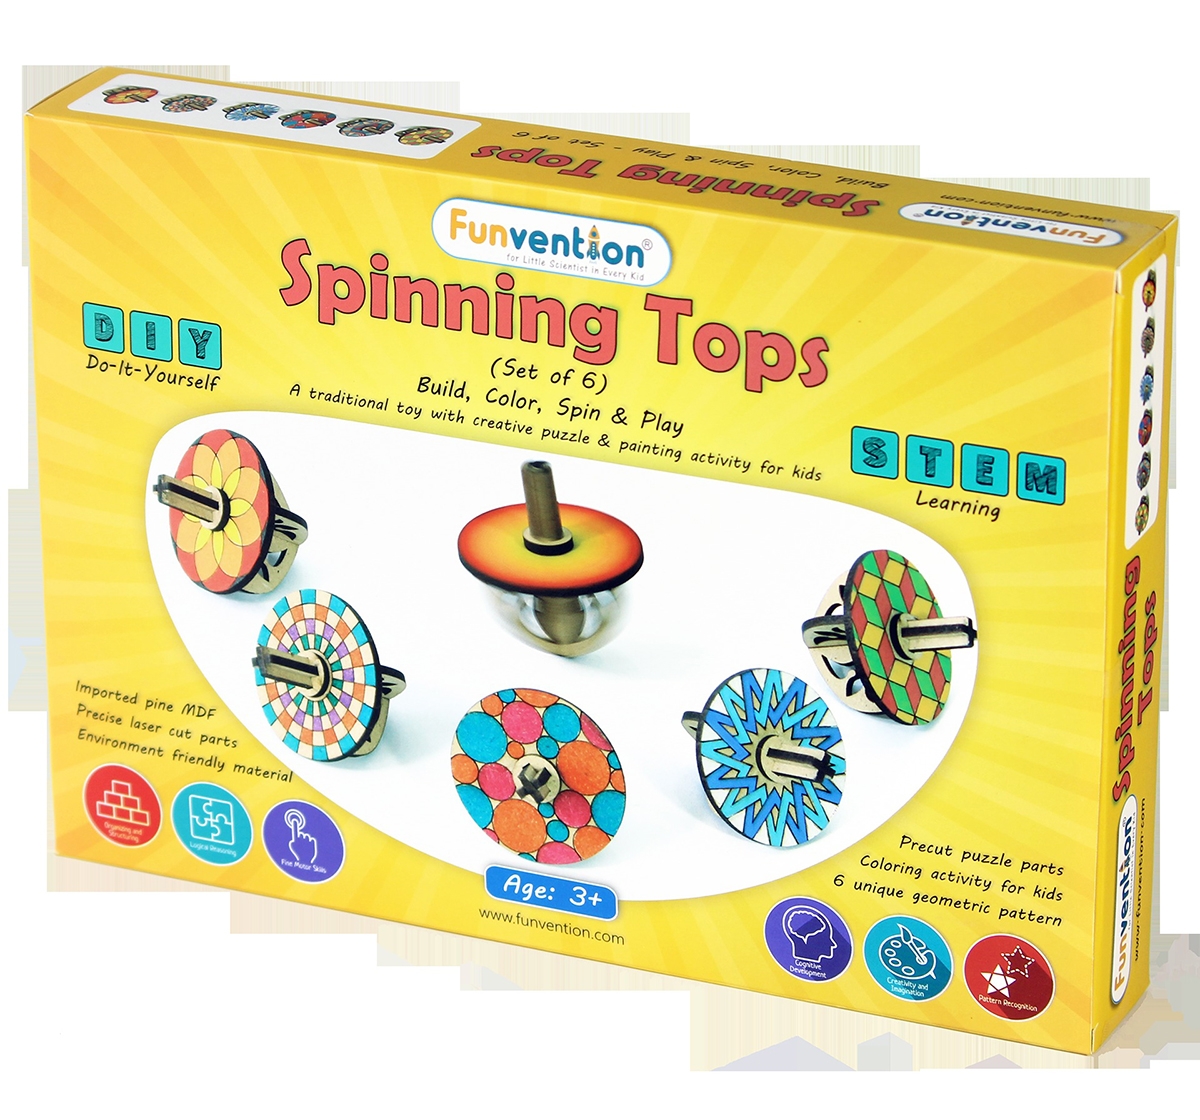 Funvention Spinning Tops - Set Of 6 Diy Spin Top Science Kits for Kids Age 3Y+